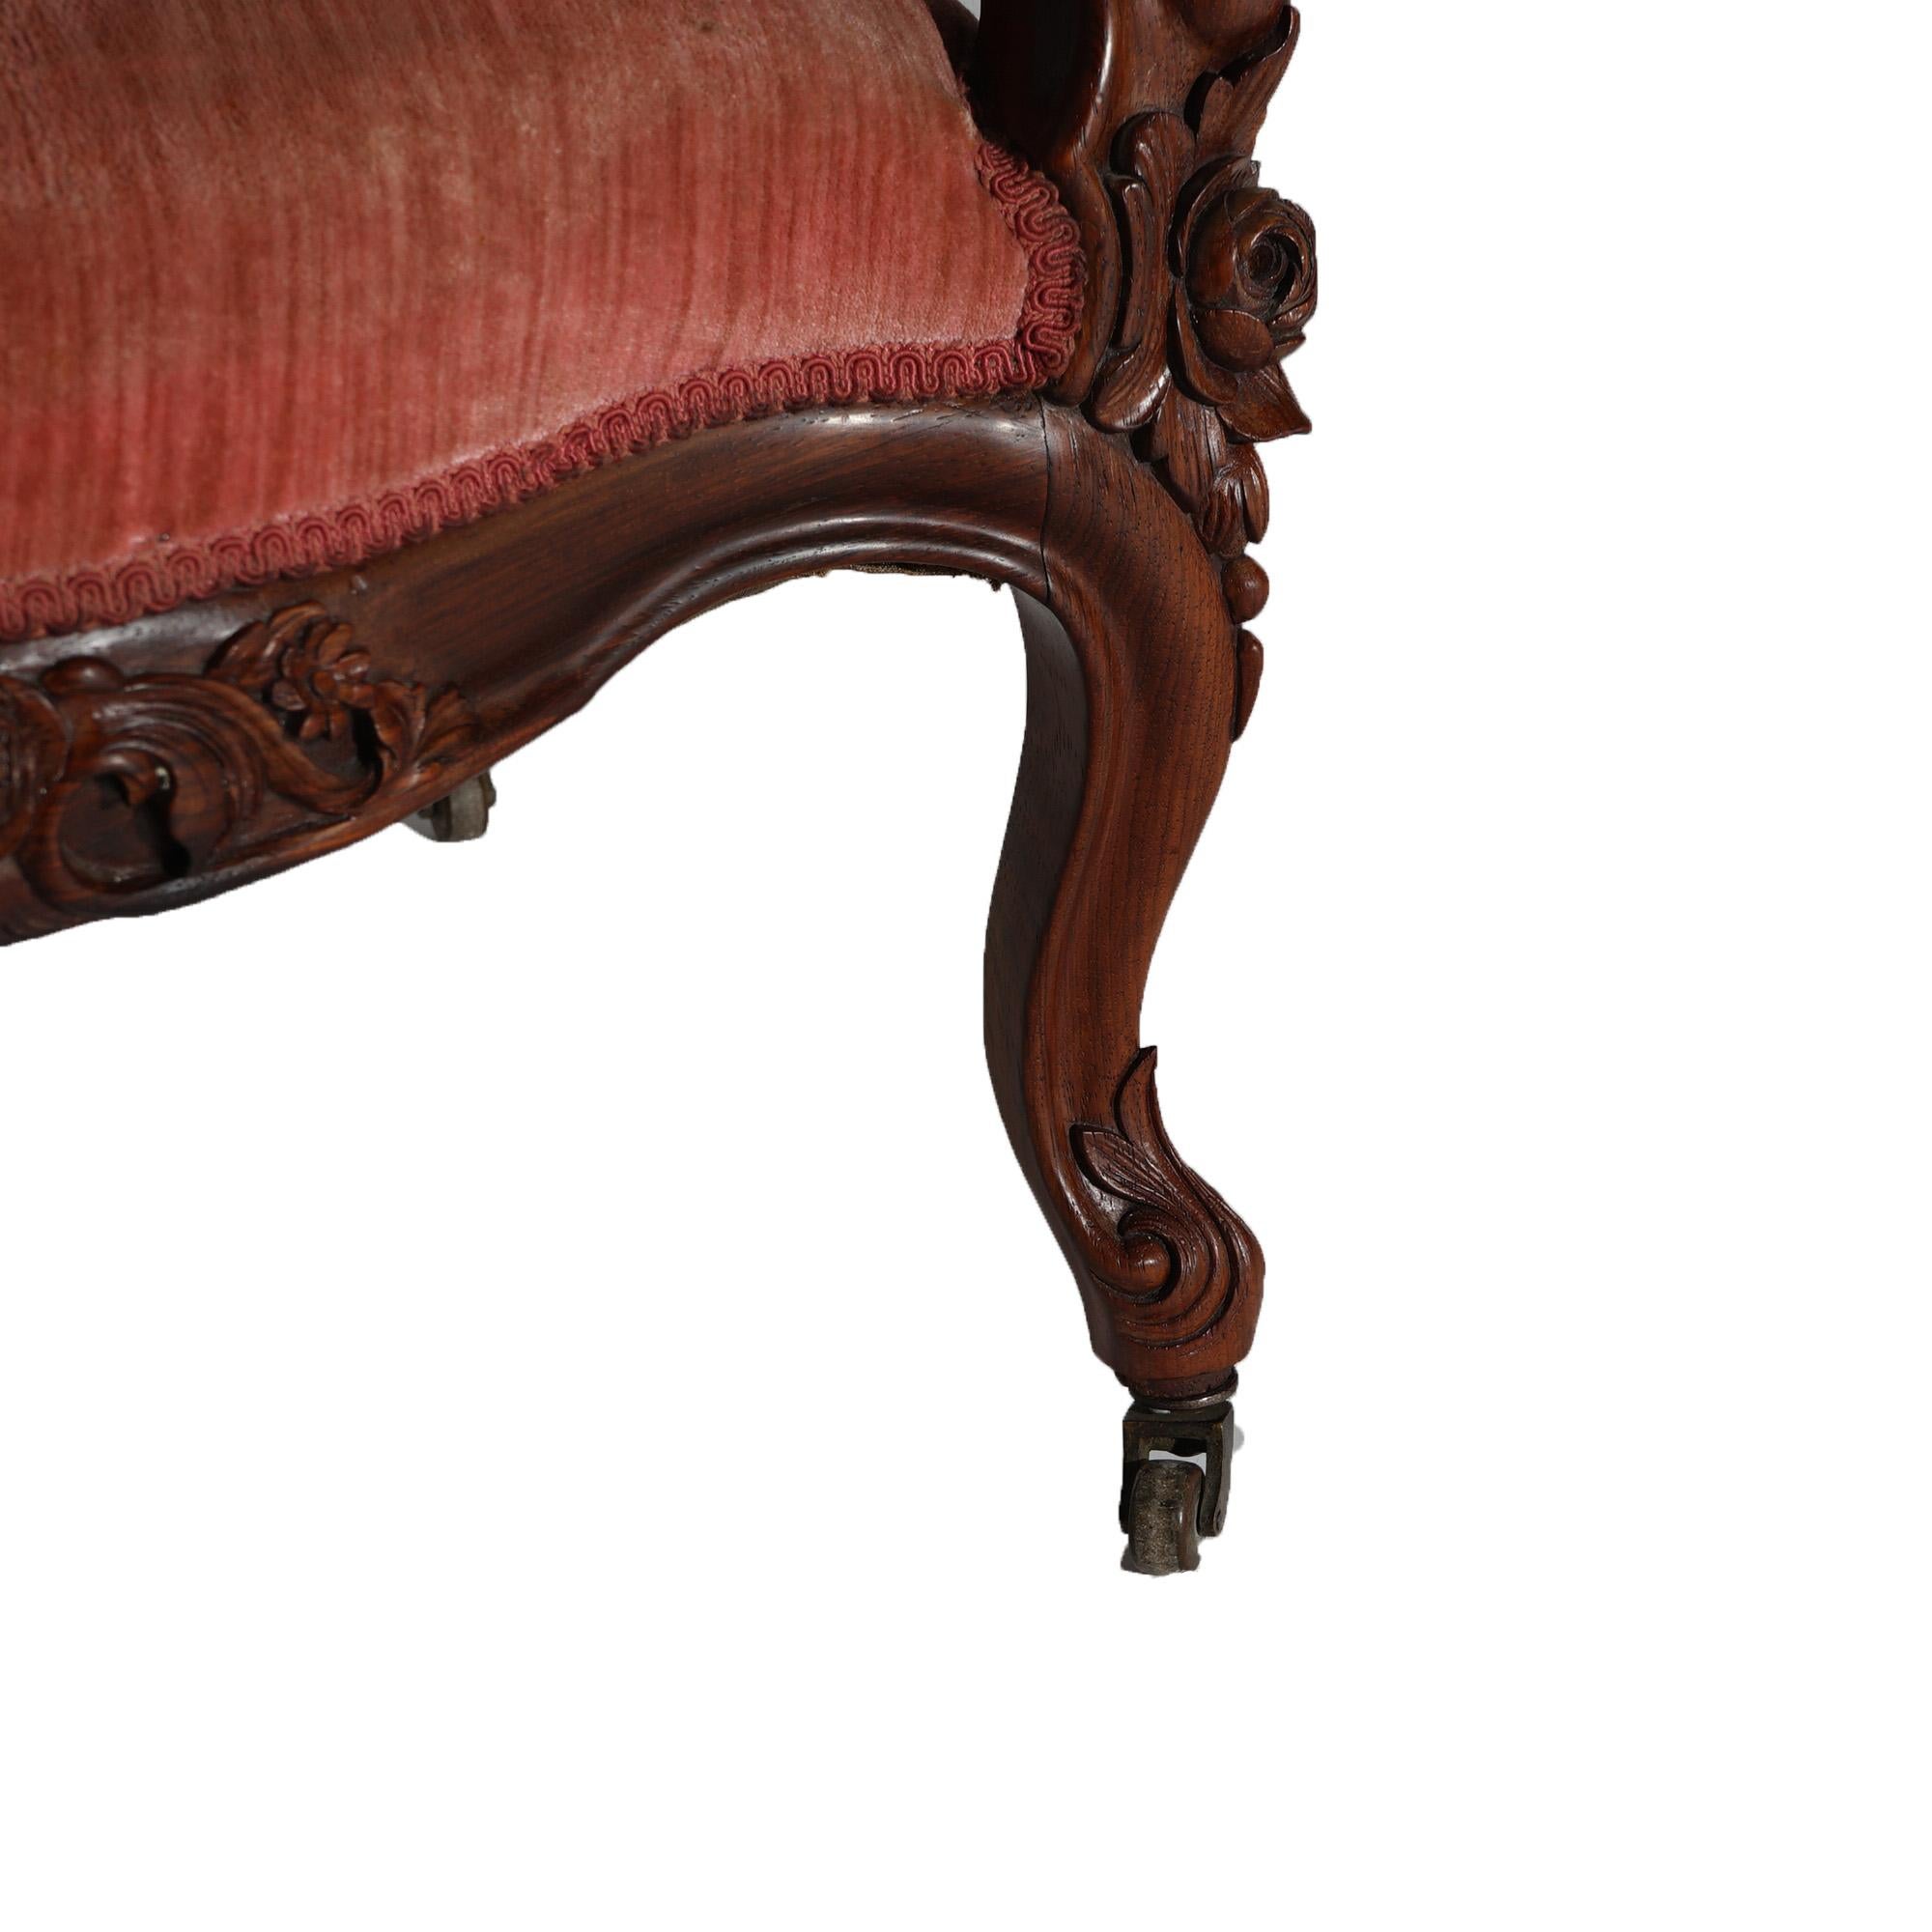 Upholstery Antique Victorian Belter Rococo Rosella Carved Rosewood Armchair with Grapes 